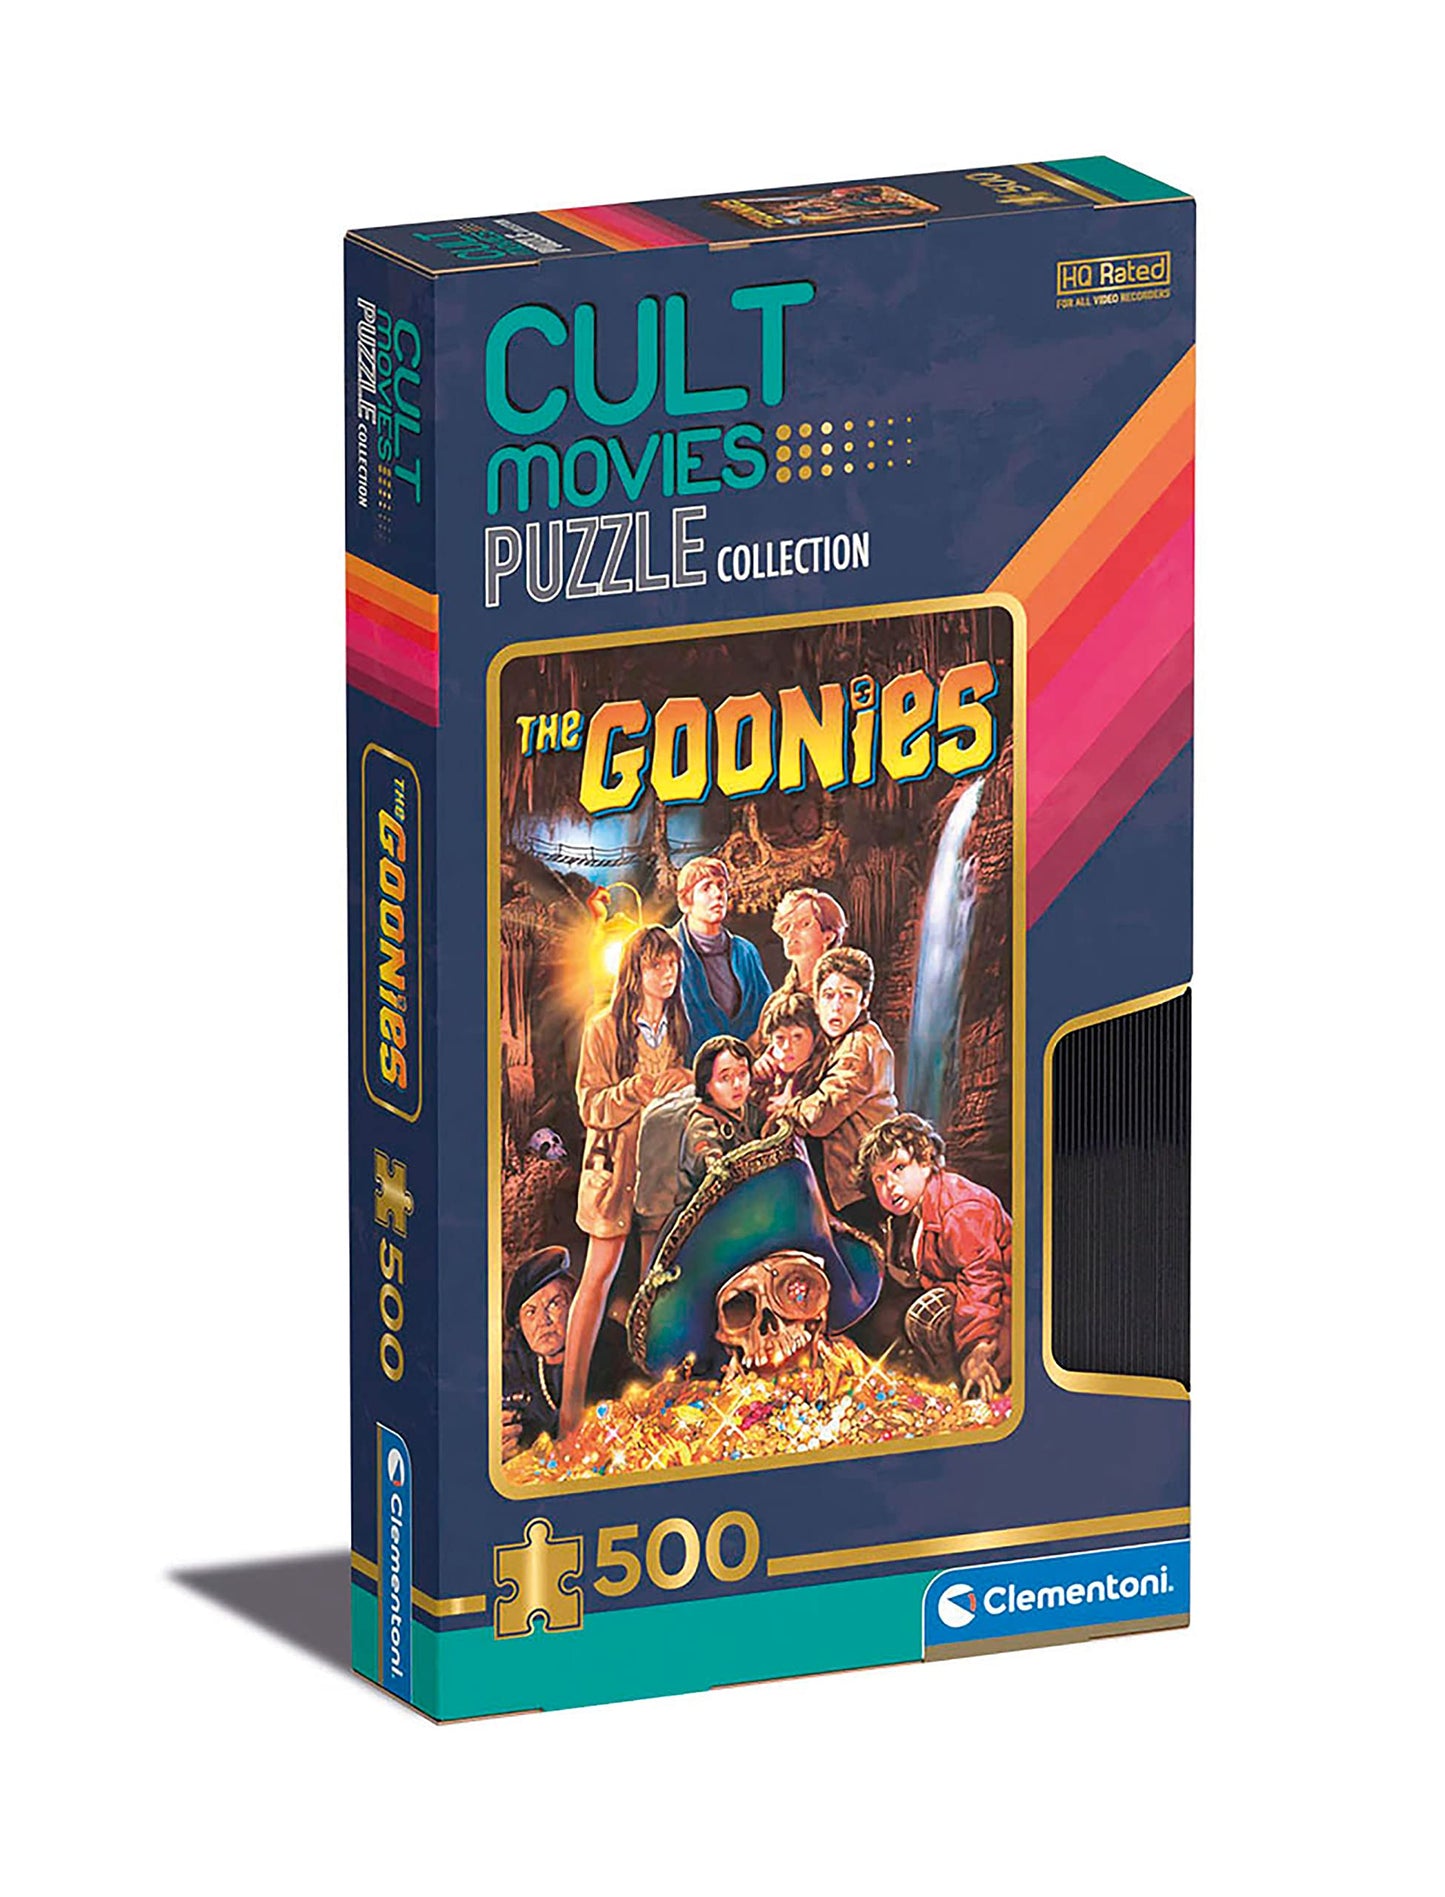 Cult Movies - The Goonies, 500 Piece Puzzle